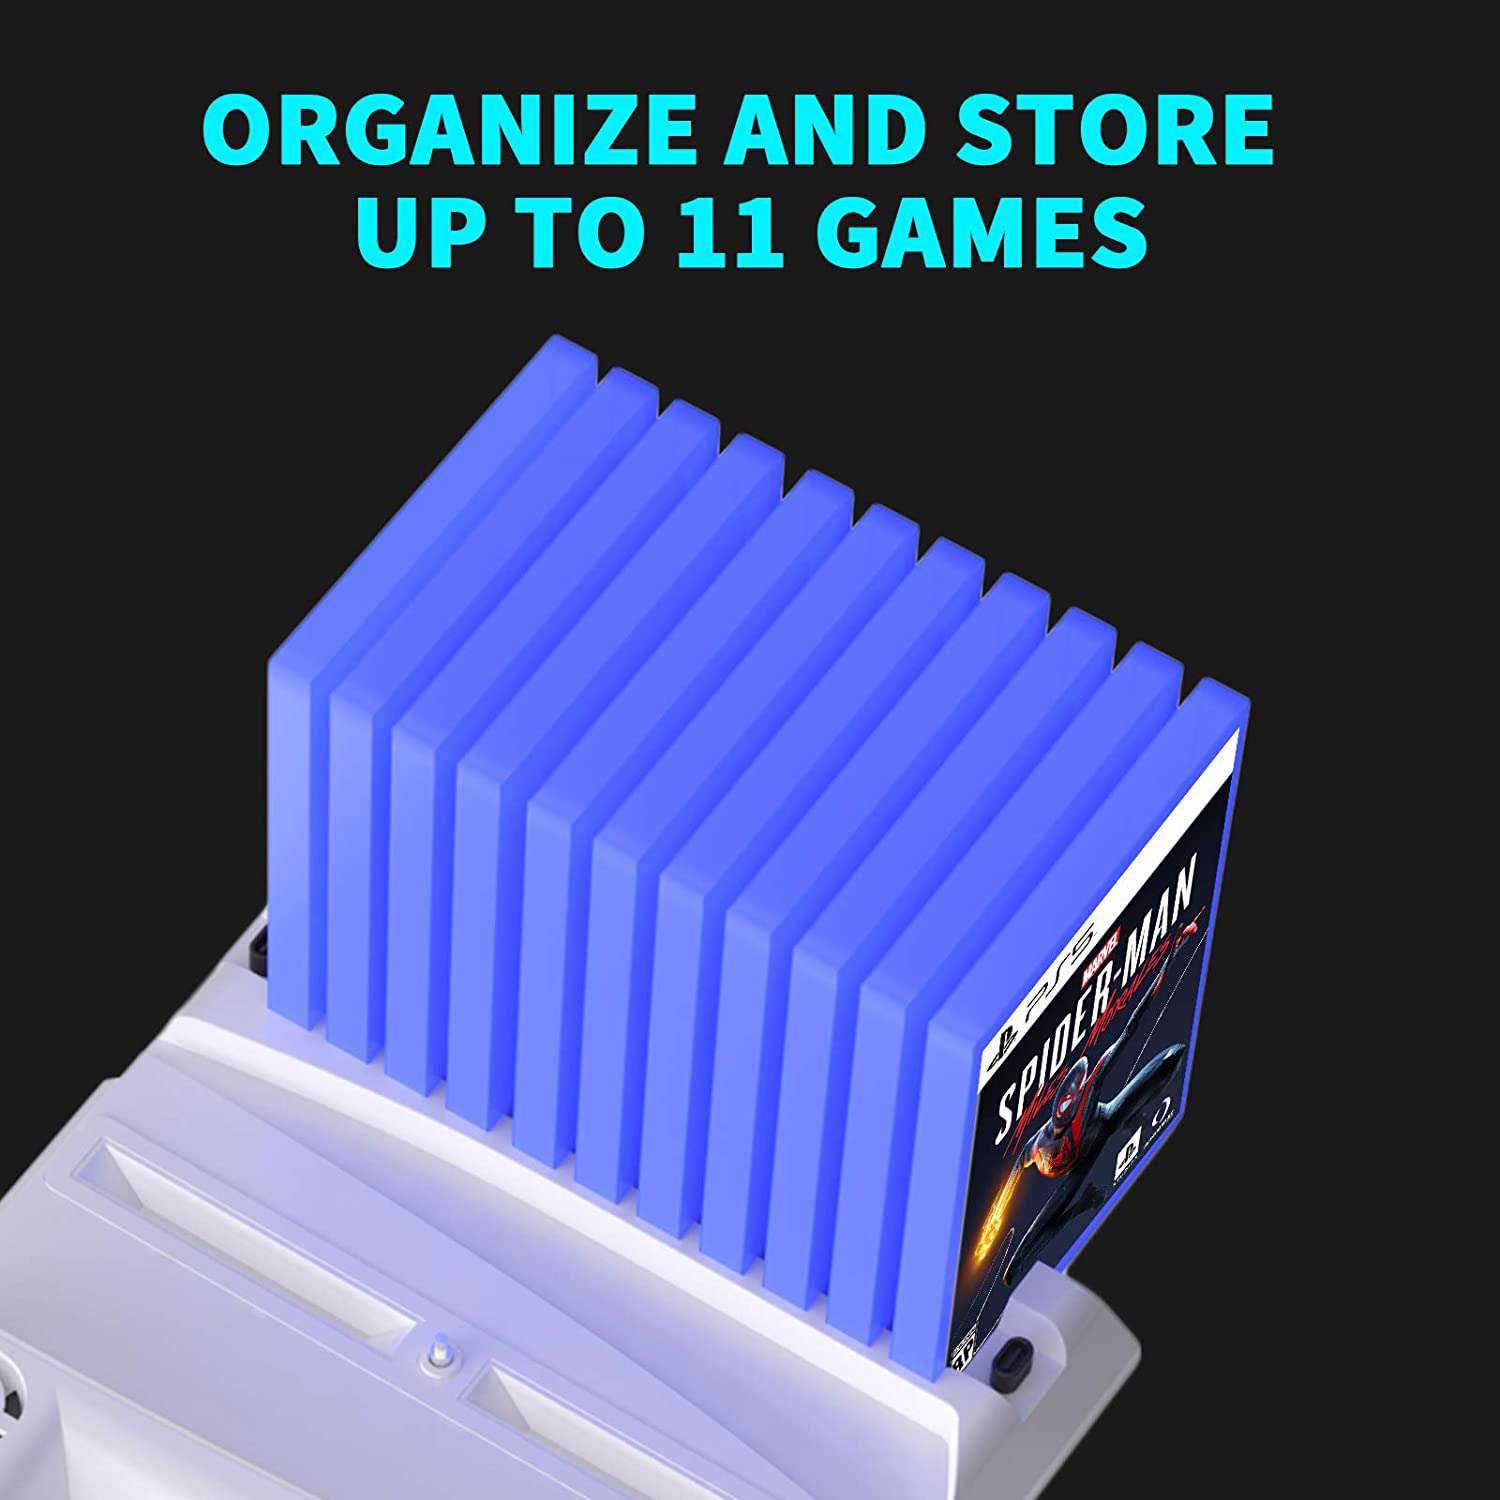 Game Rack Organizer stores up to 11 games.